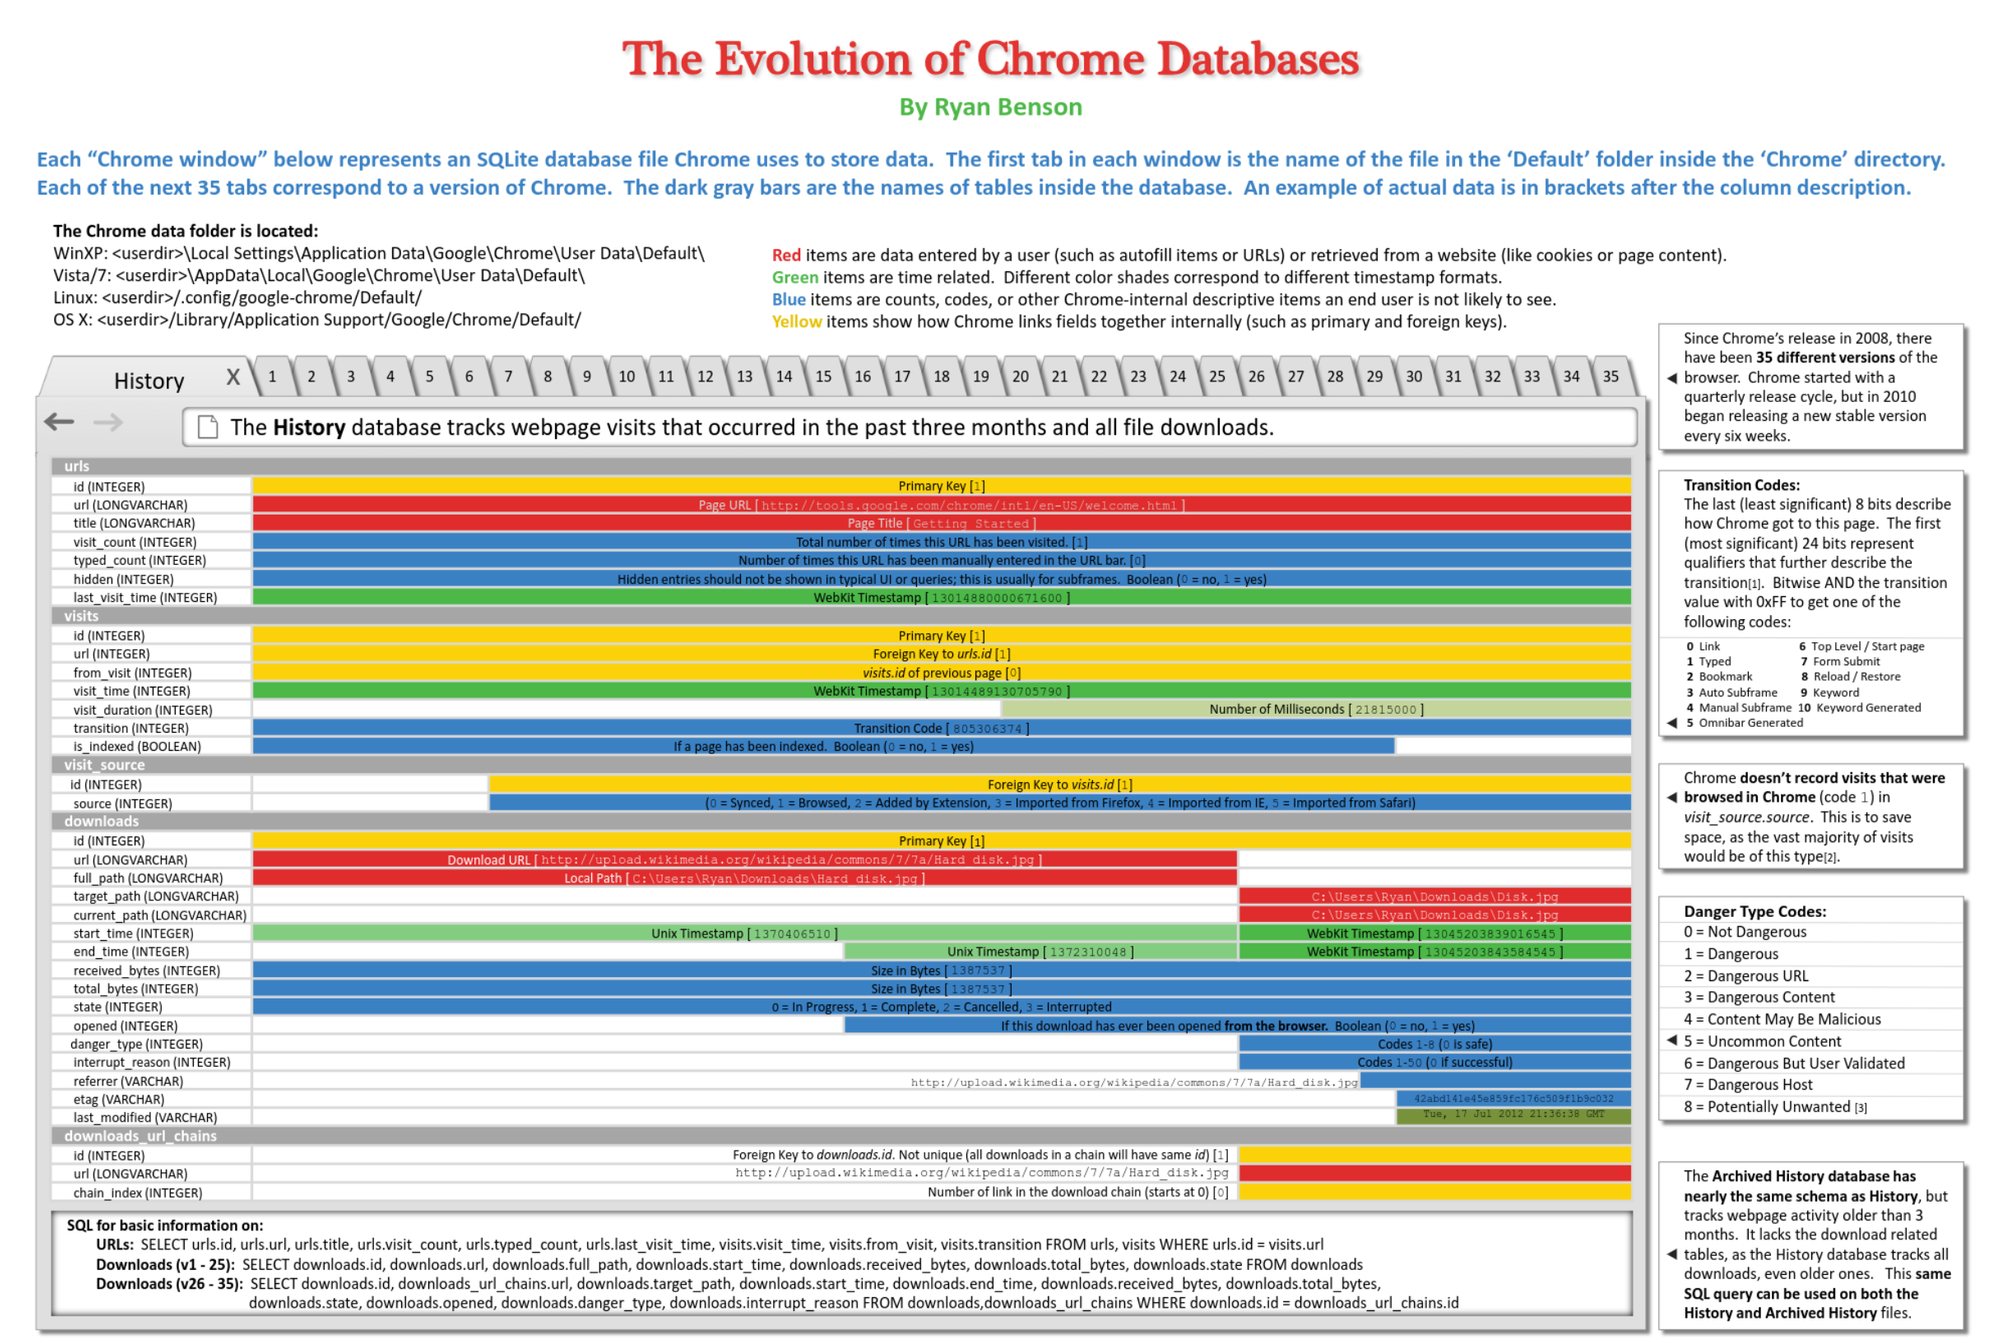 The Evolution of Chrome Databases Reference Chart